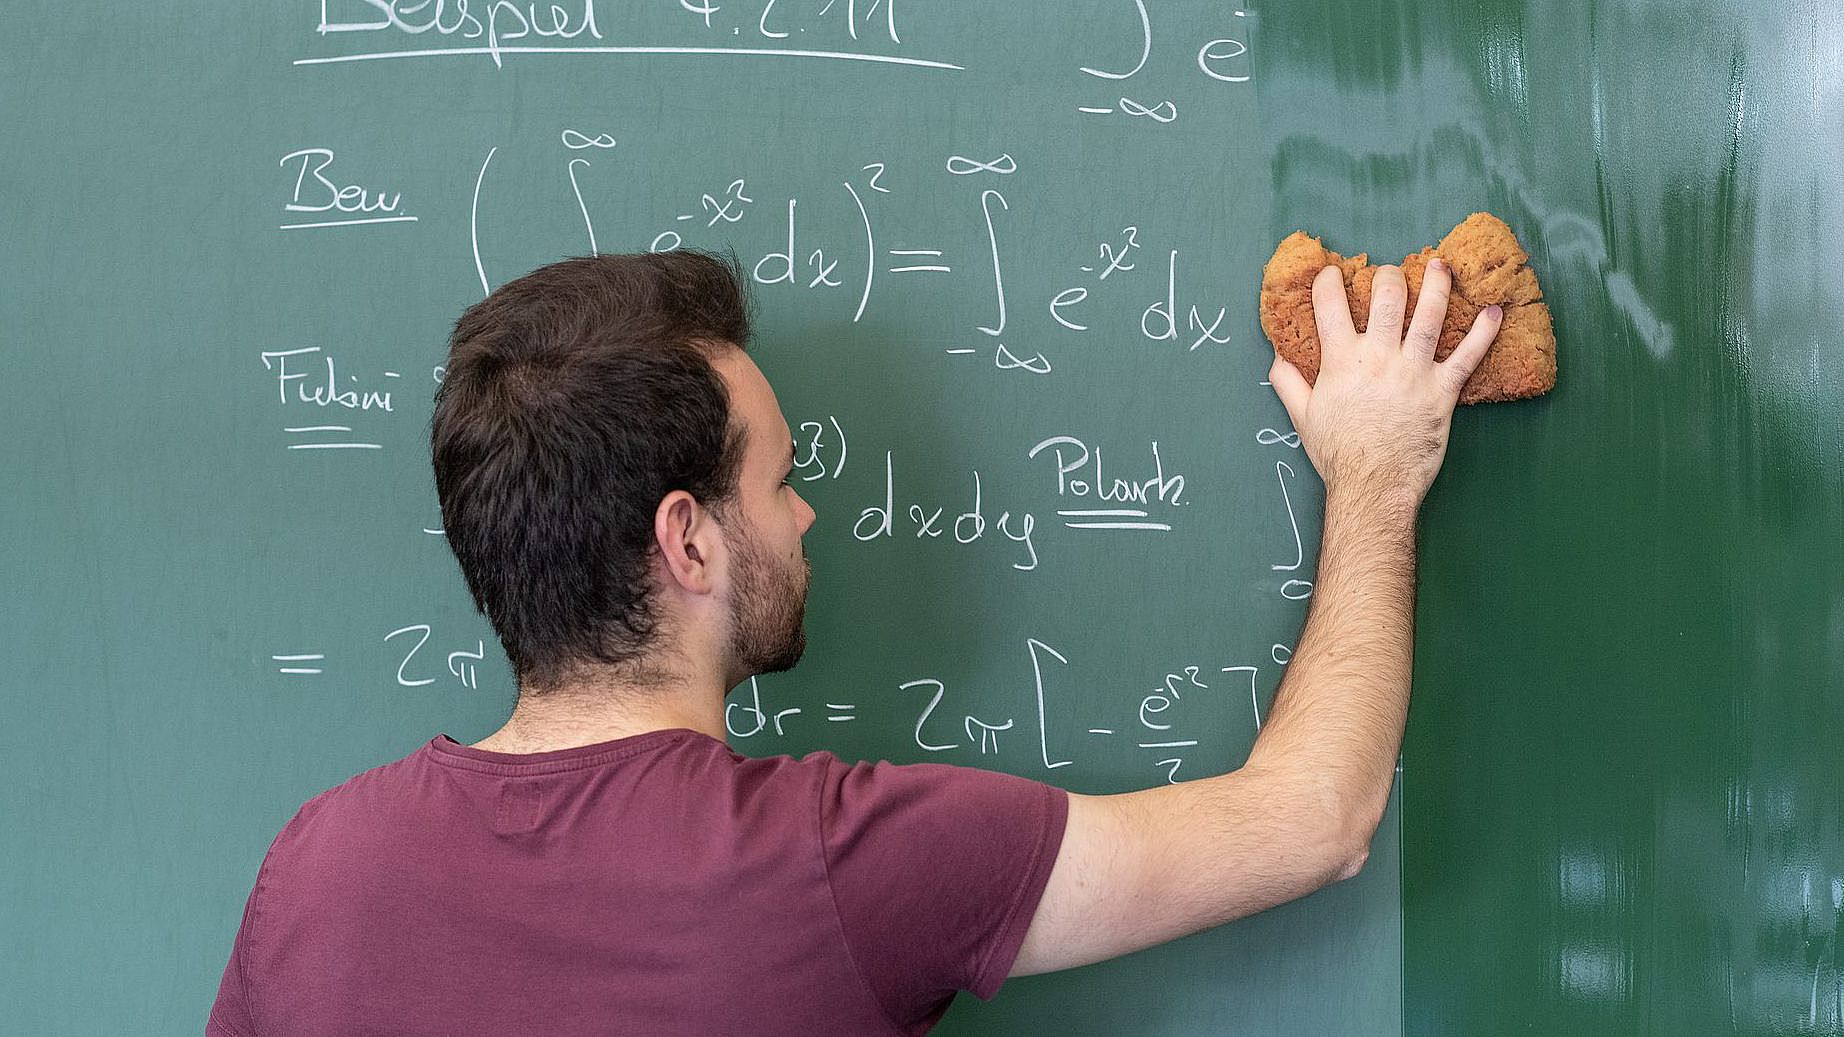 Lecturer wipes the blackboard